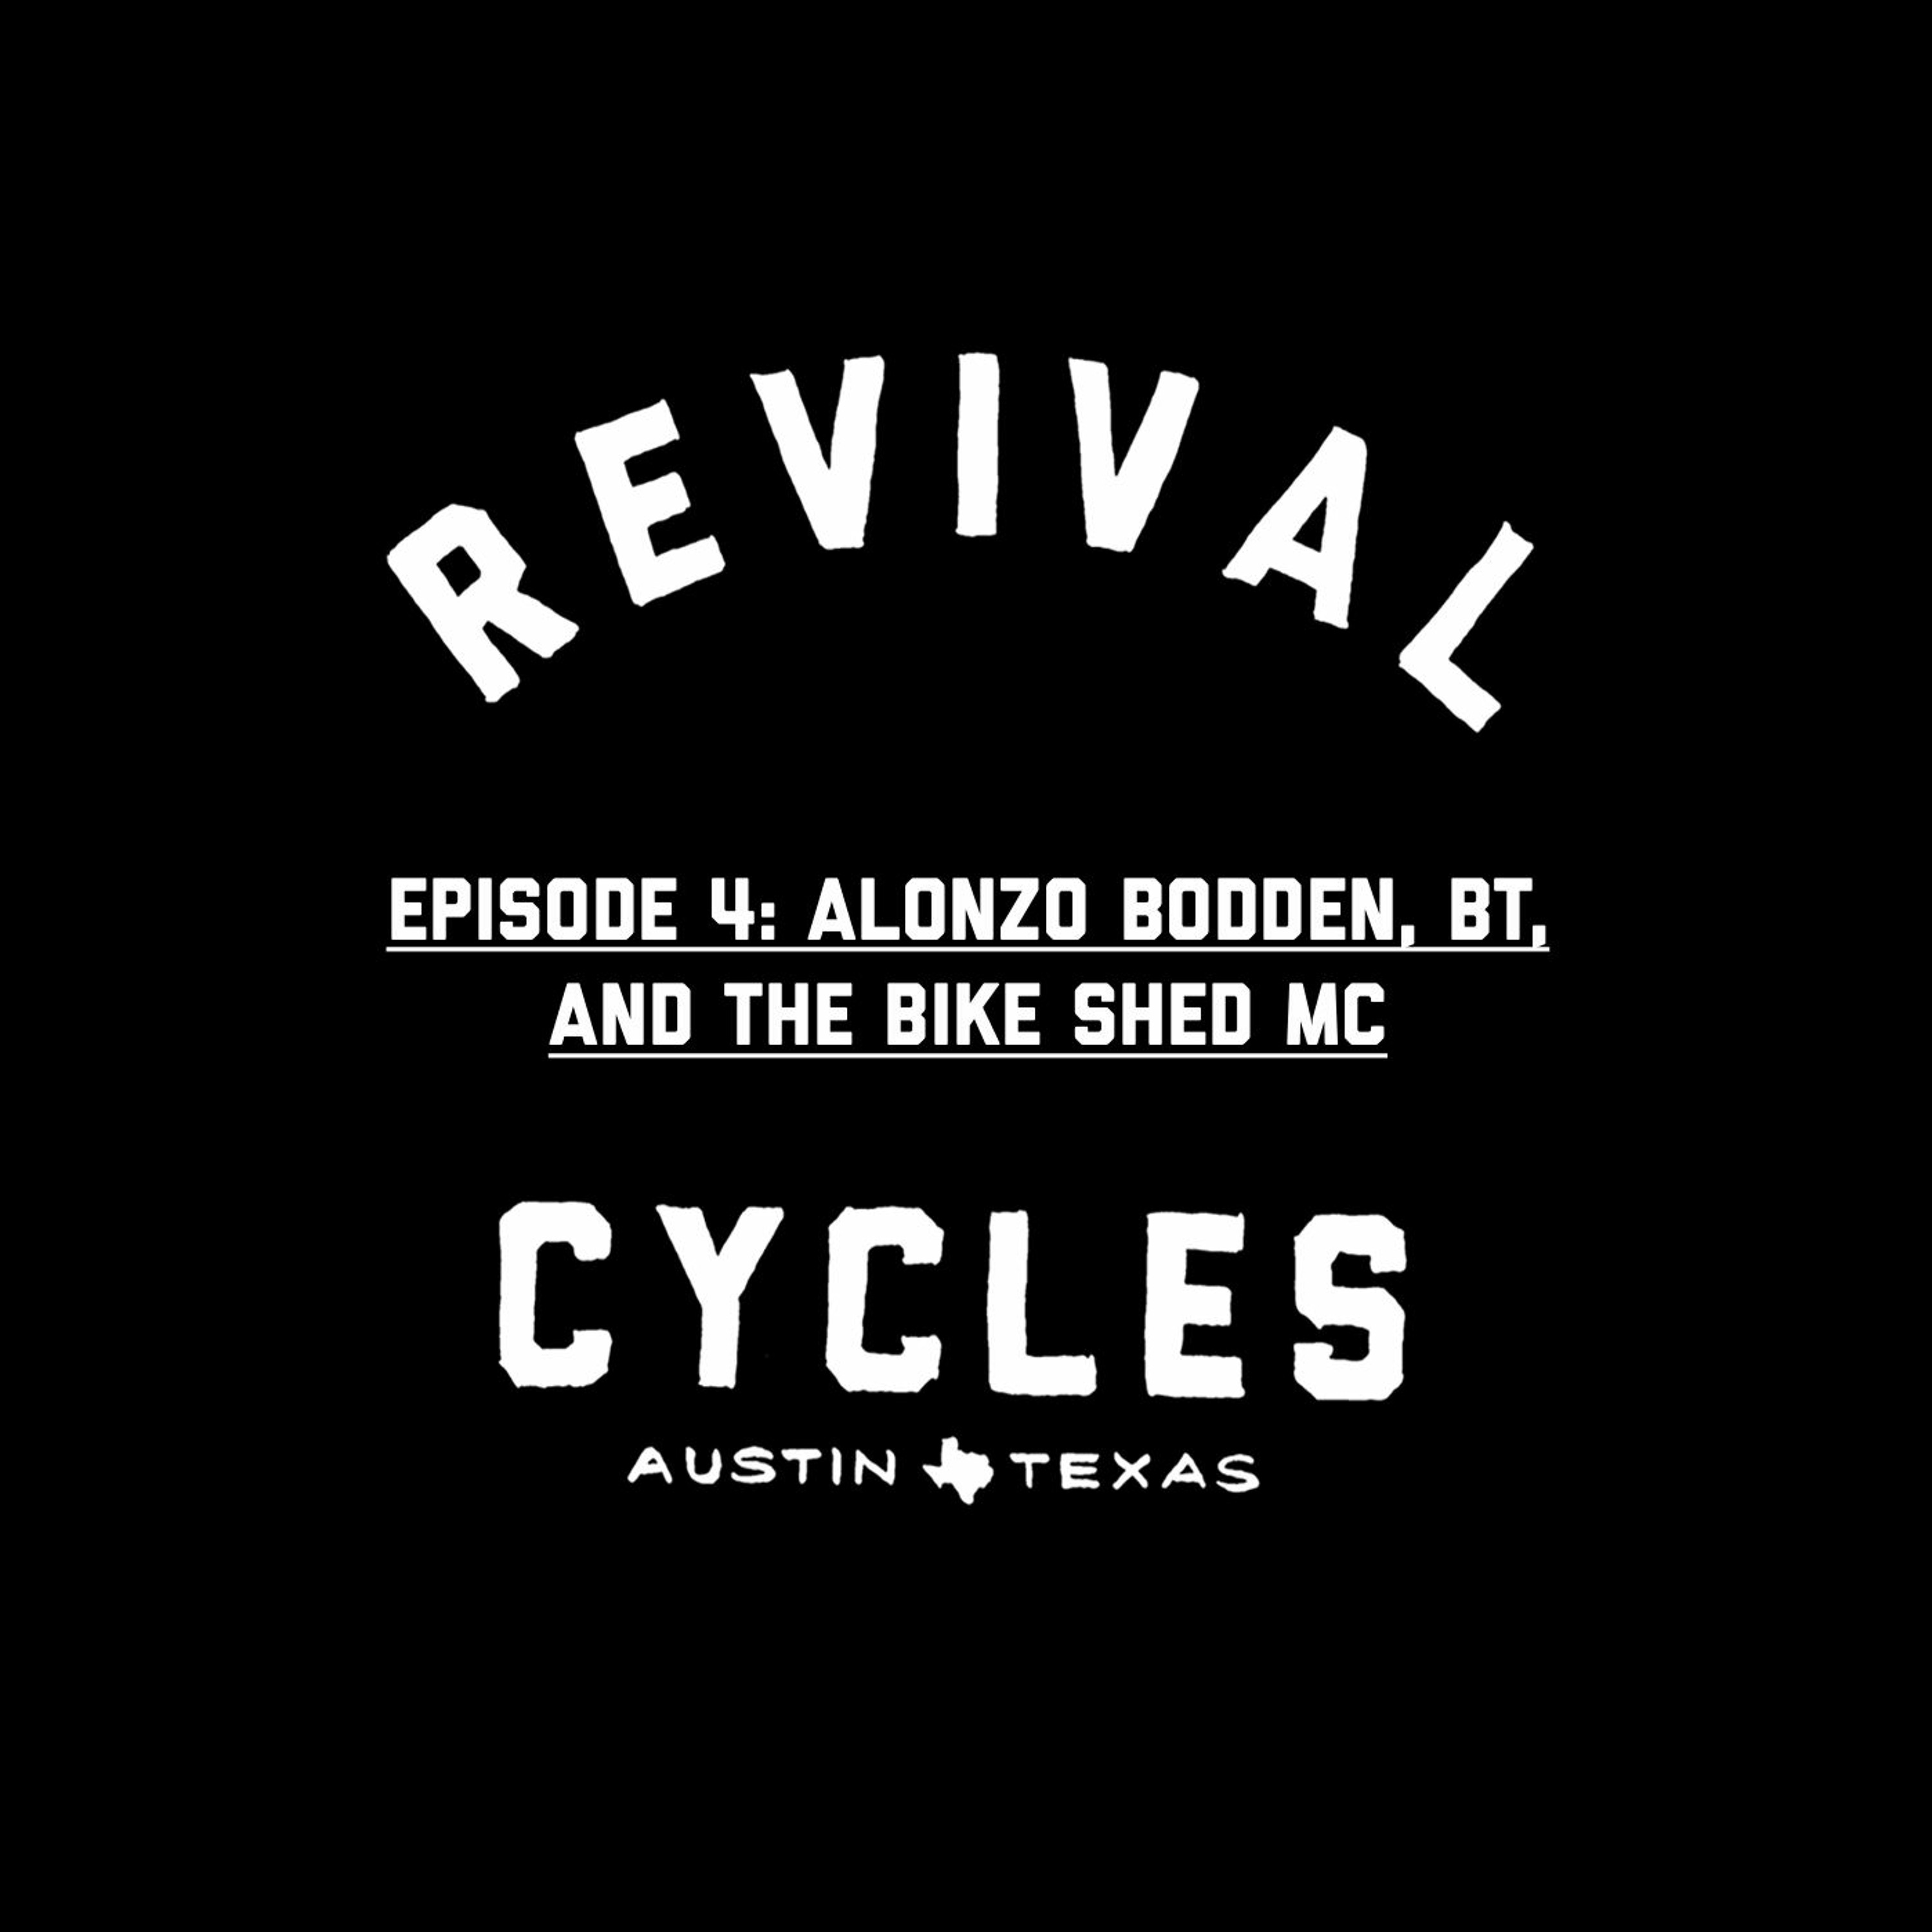 Episode 4: Alonzo Bodden, BT, and Bike Shed Motorcycle Club